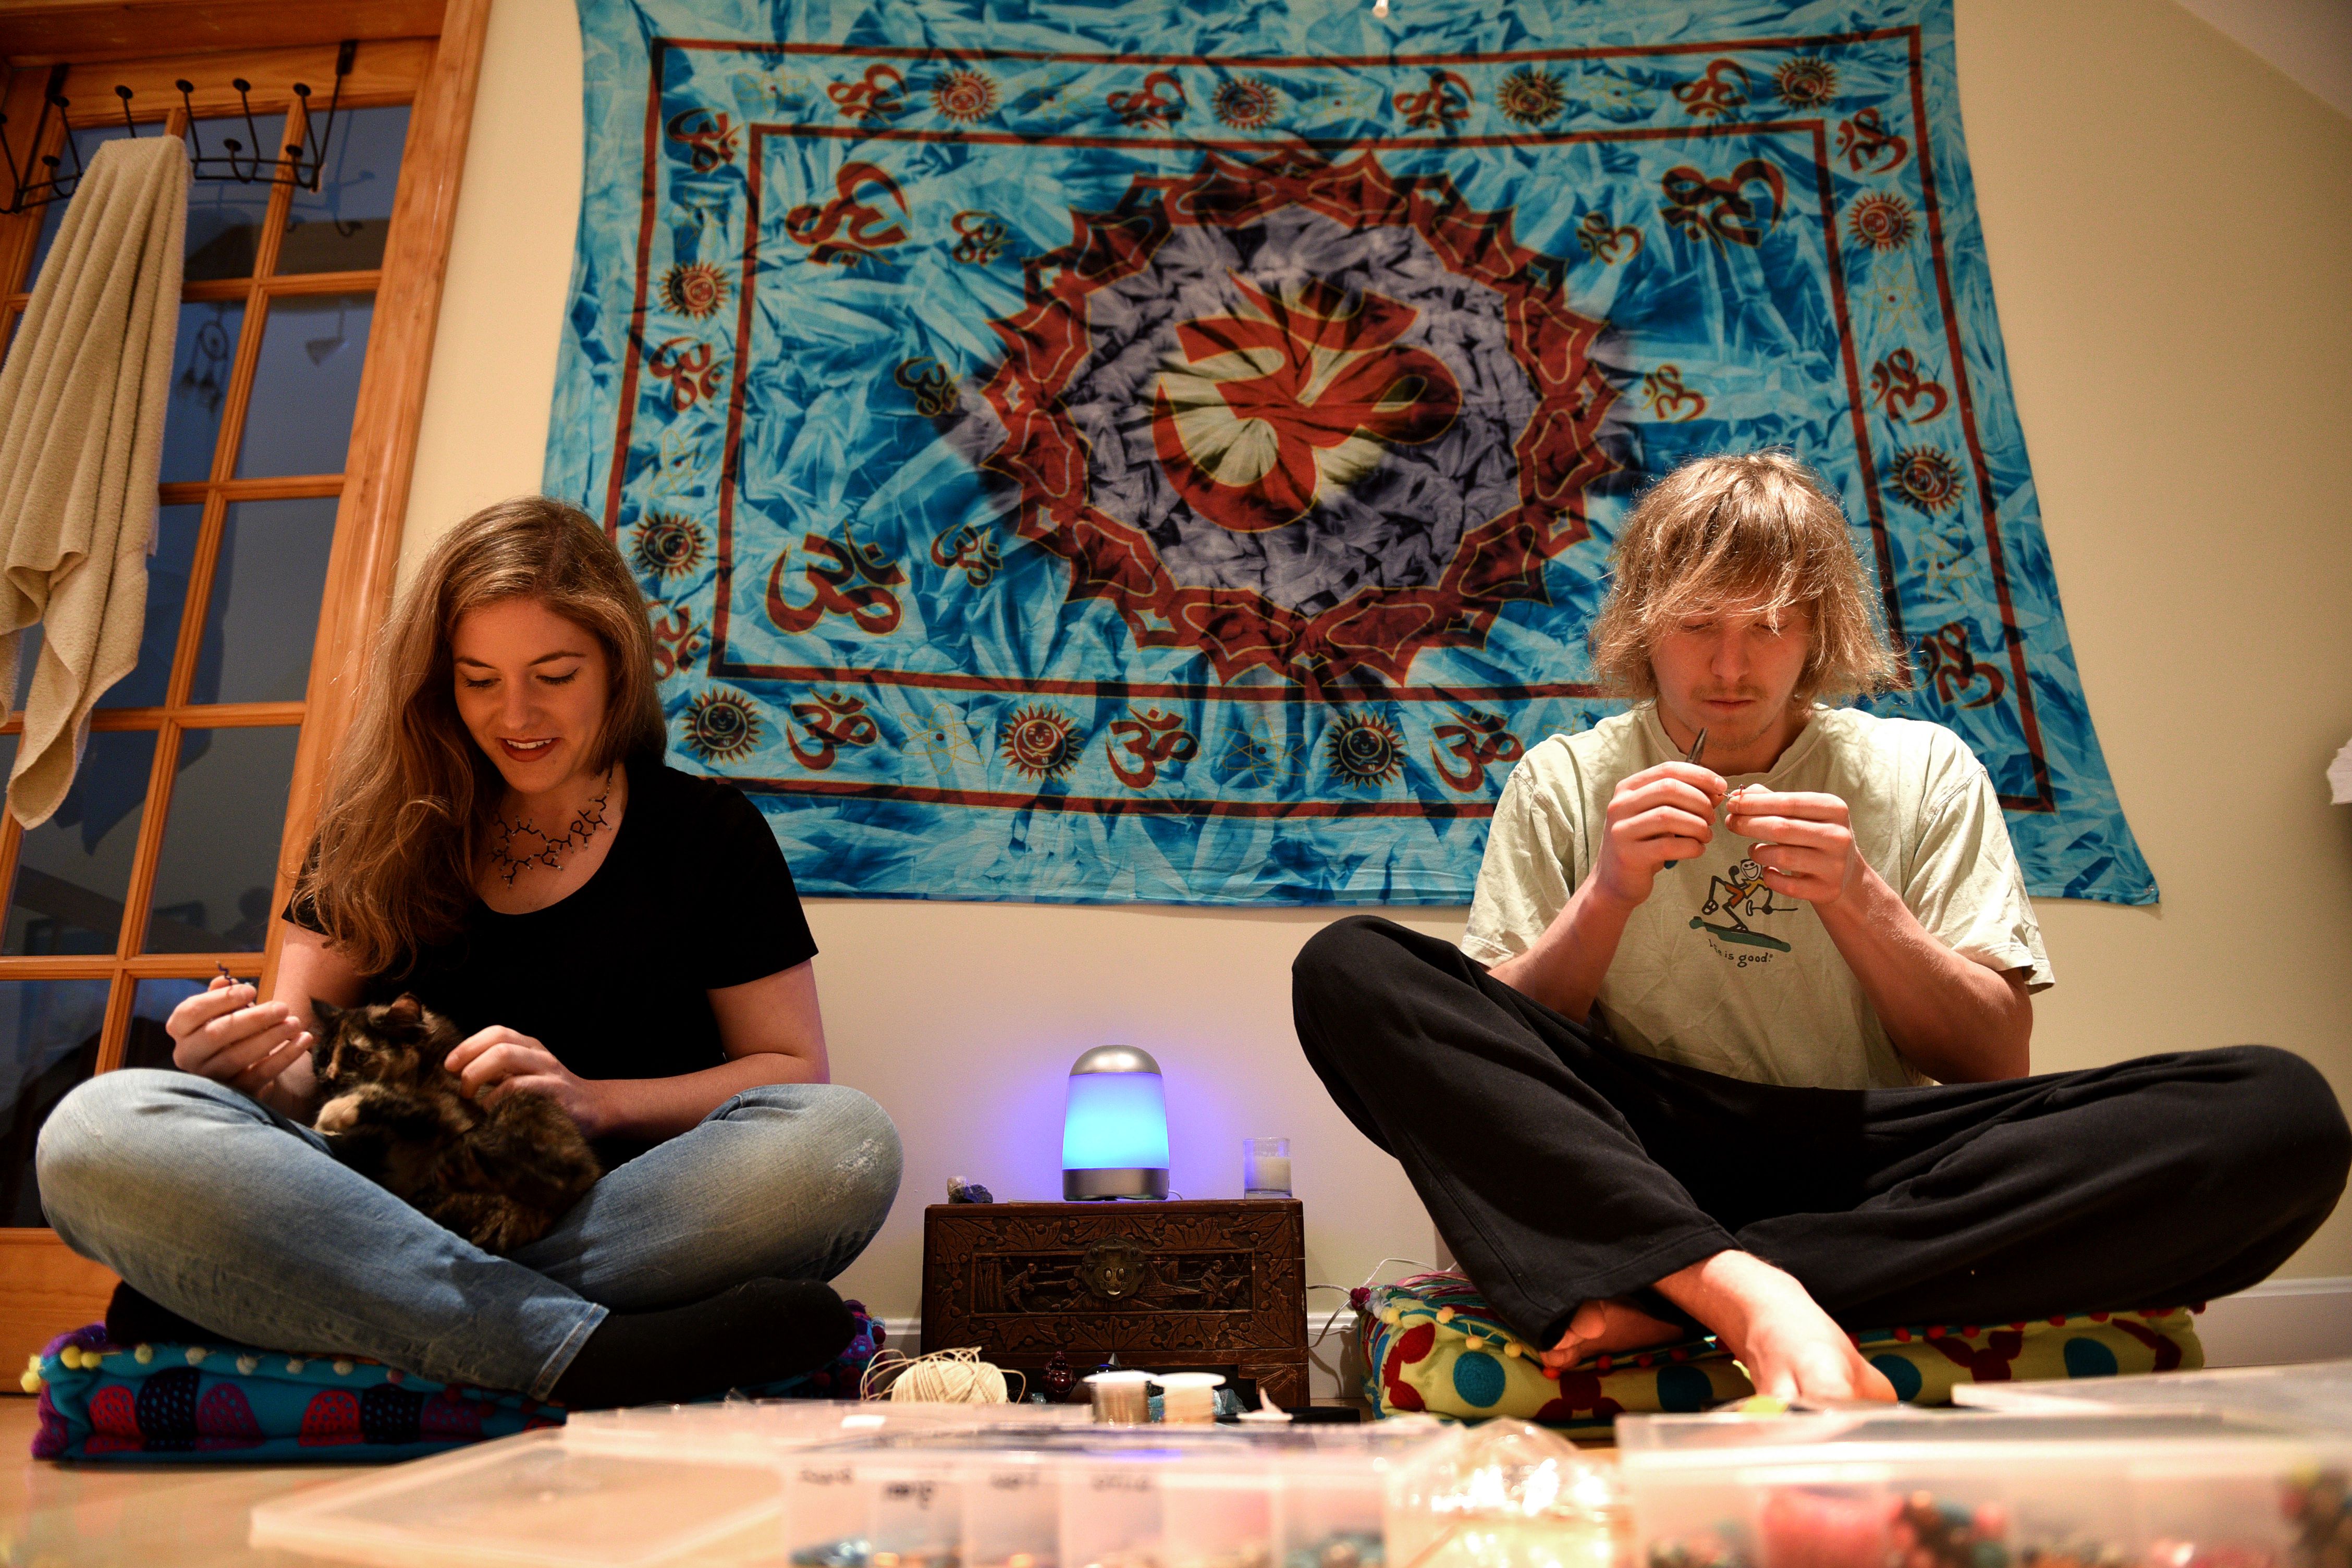 Rachel Henne and Andrew Switz make jewelry in the shape of various molecules at their home in Quechee, Vt., on May 18, 2016. Their kitten Tina is in Henne’s lap. (Valley News - Jennifer Hauck) Copyright Valley News. May not be reprinted or used online without permission. Send requests to permission@vnews.com.